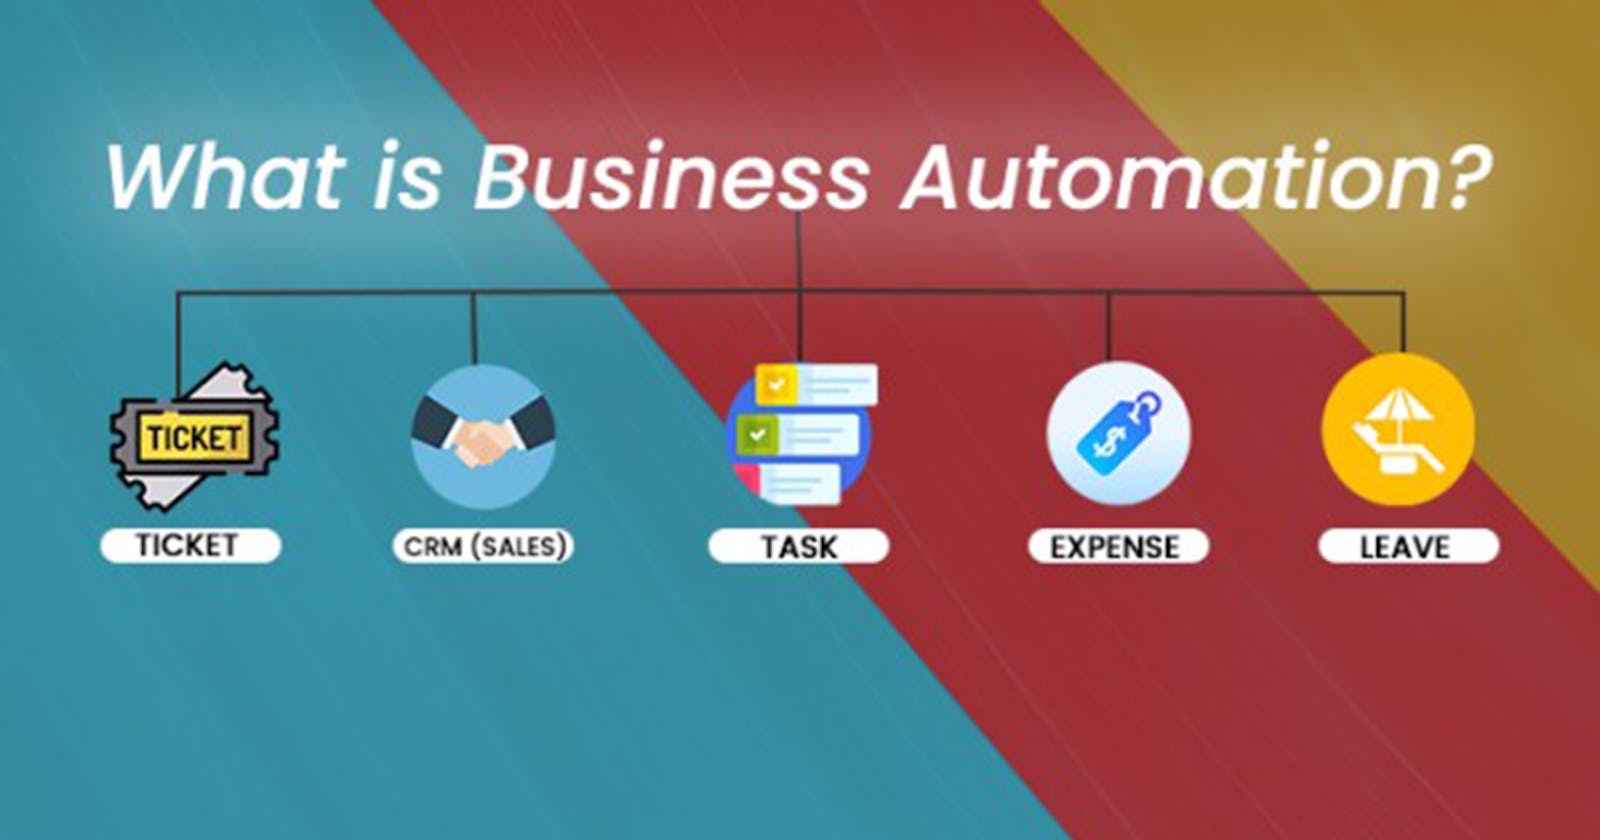 What is Business Automation?